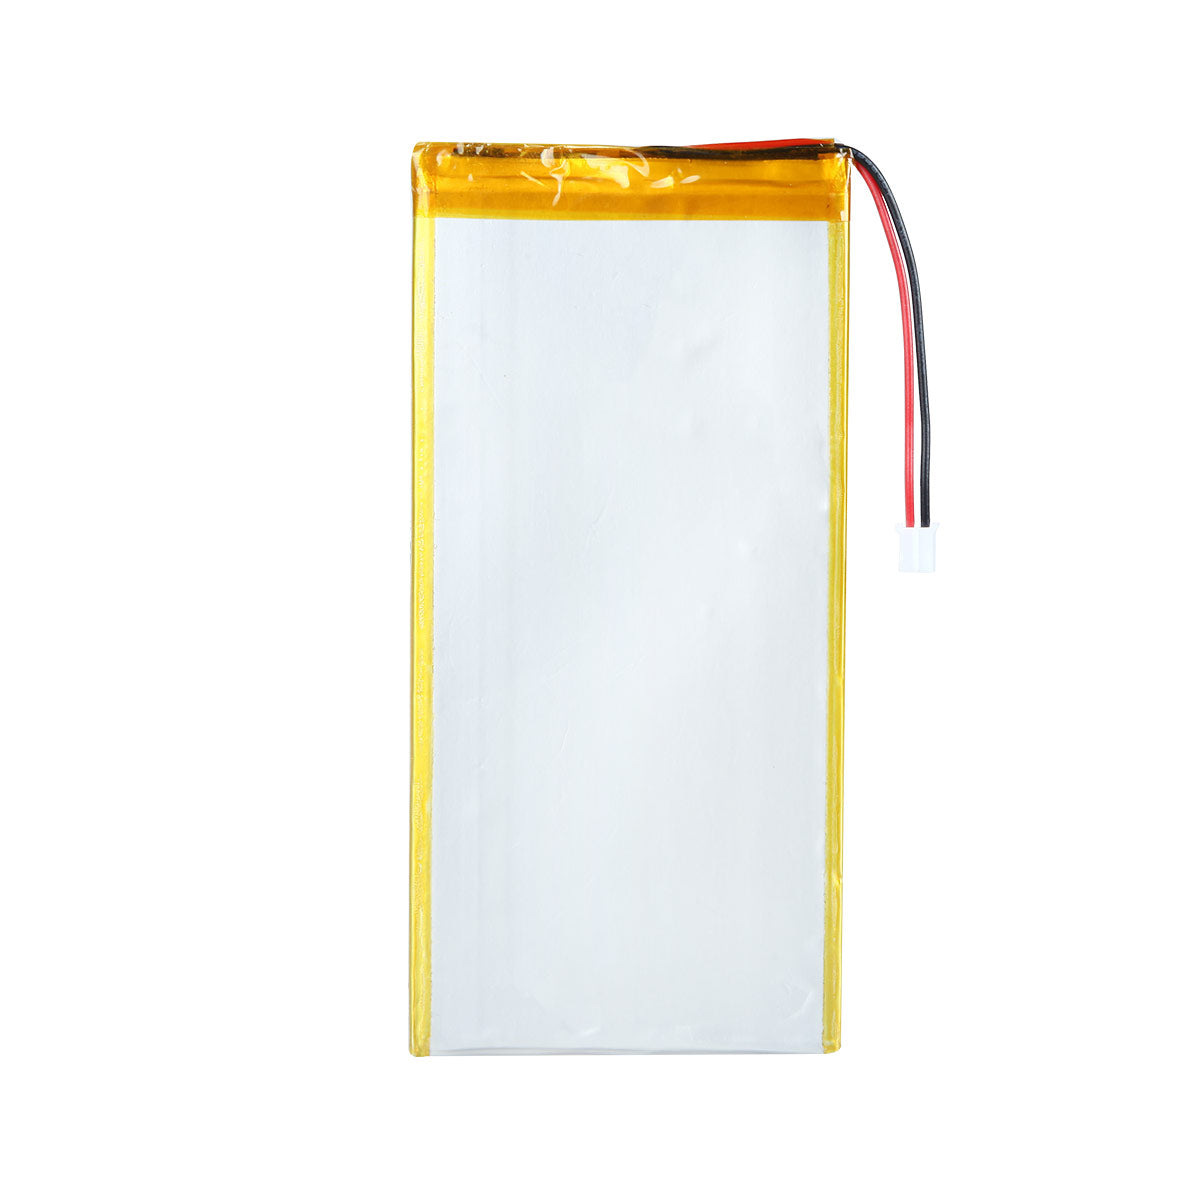 3.7V 3500mAh 4056127 Lithium Polymer Ion Rechargeable Li-Po Battery